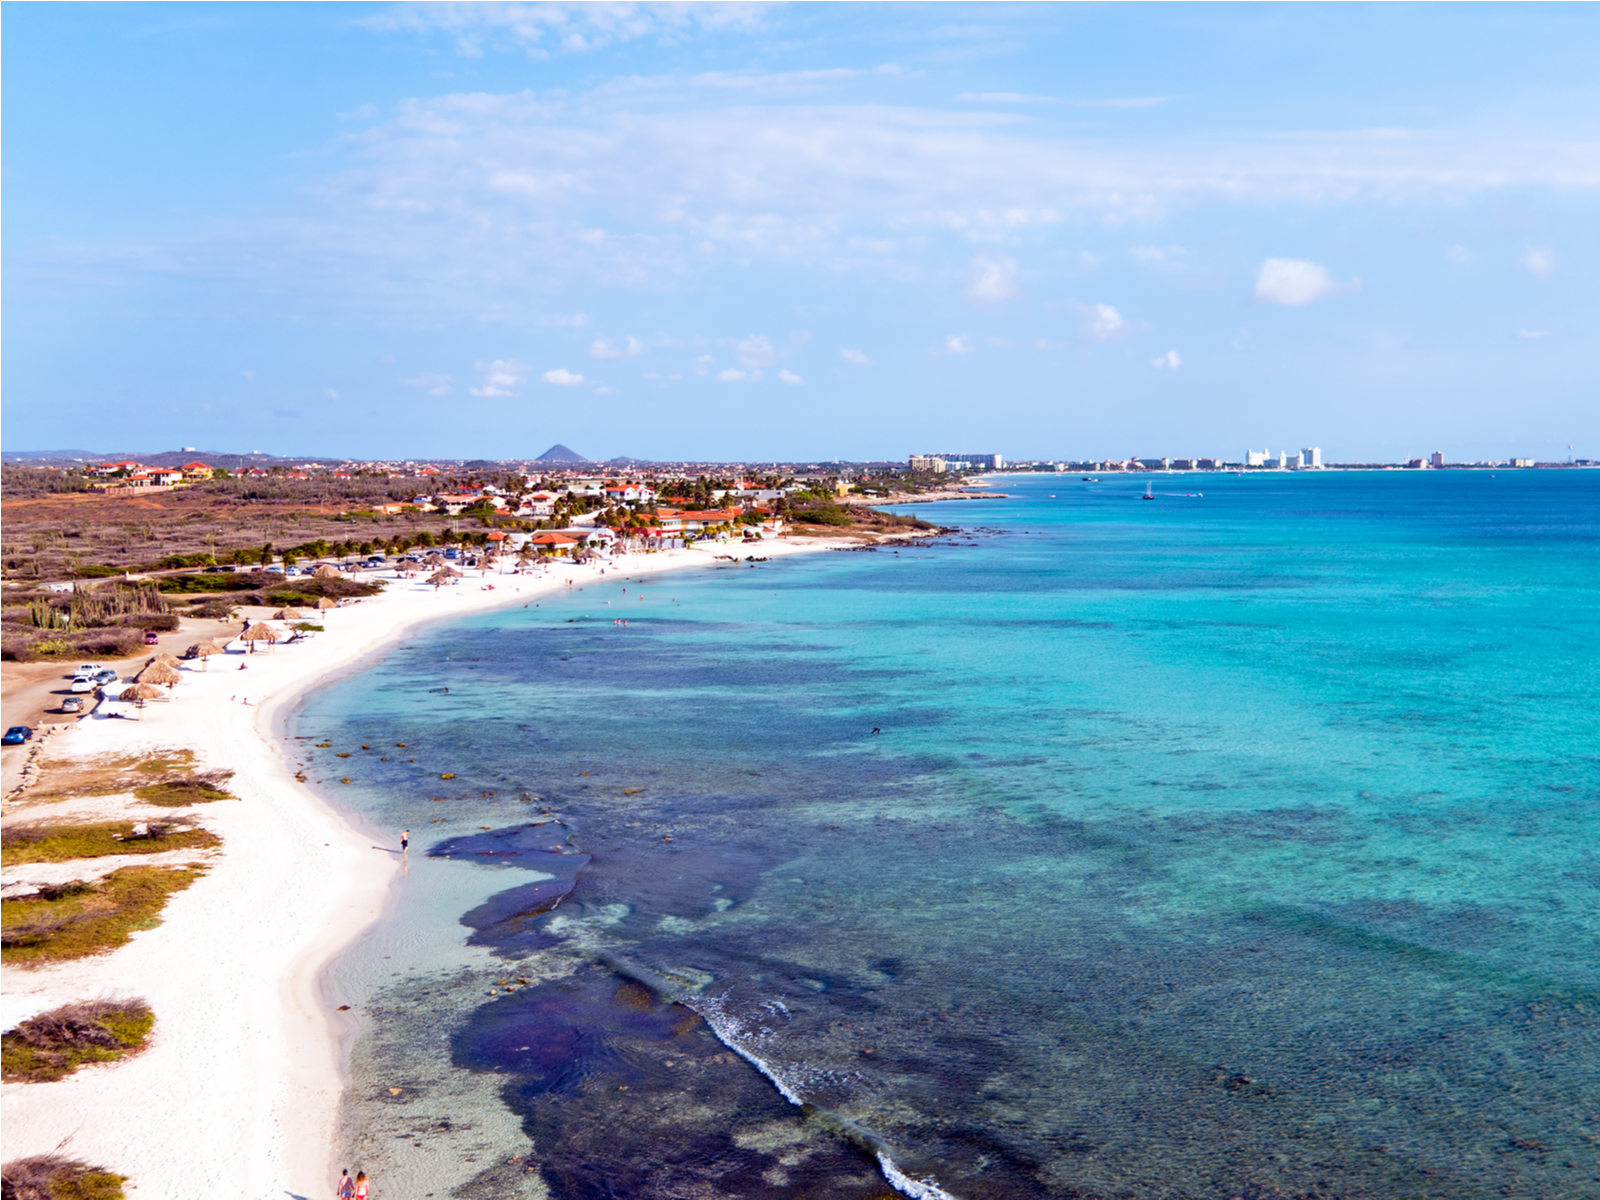 Aerial view of several people waking on the wide sand of Boca Catalina, one of the best beaches in Aruba and the perfect spot for snorkeling due to the offshore coral reef